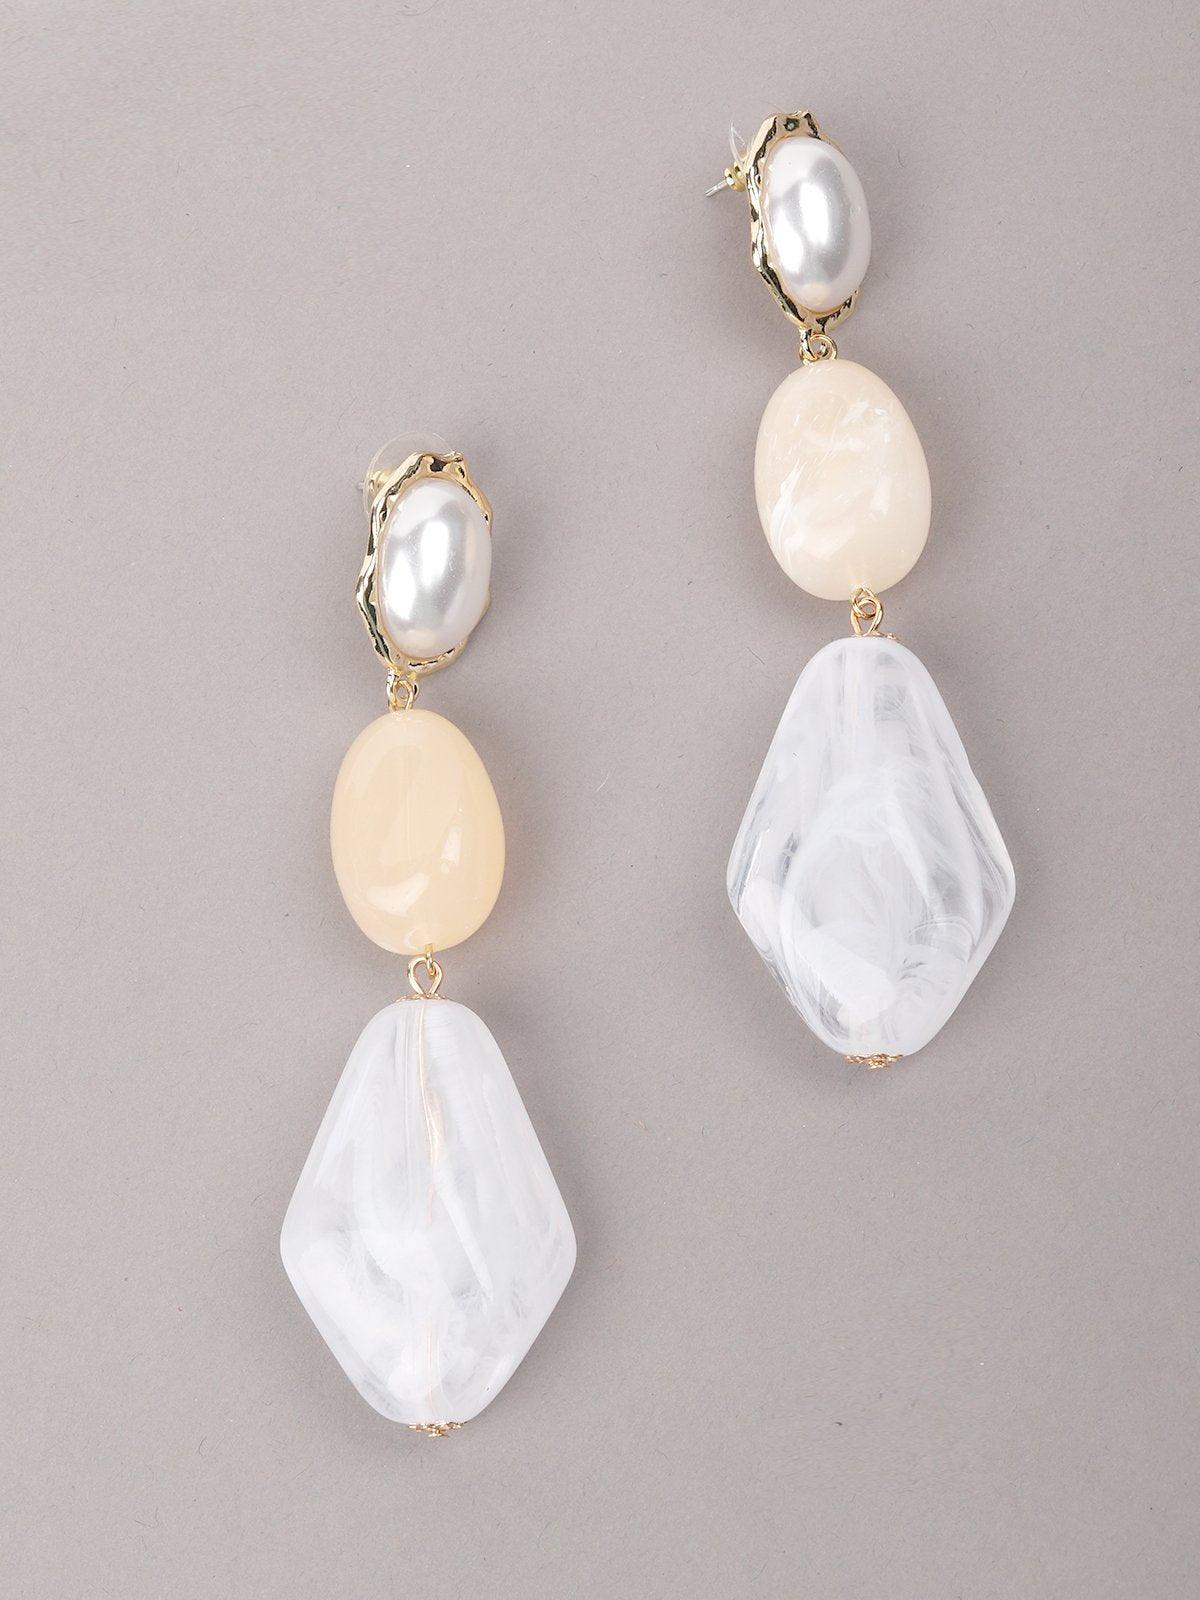 Women's White And Cream Coloured Three Interlinked Stoned Earrings - Odette